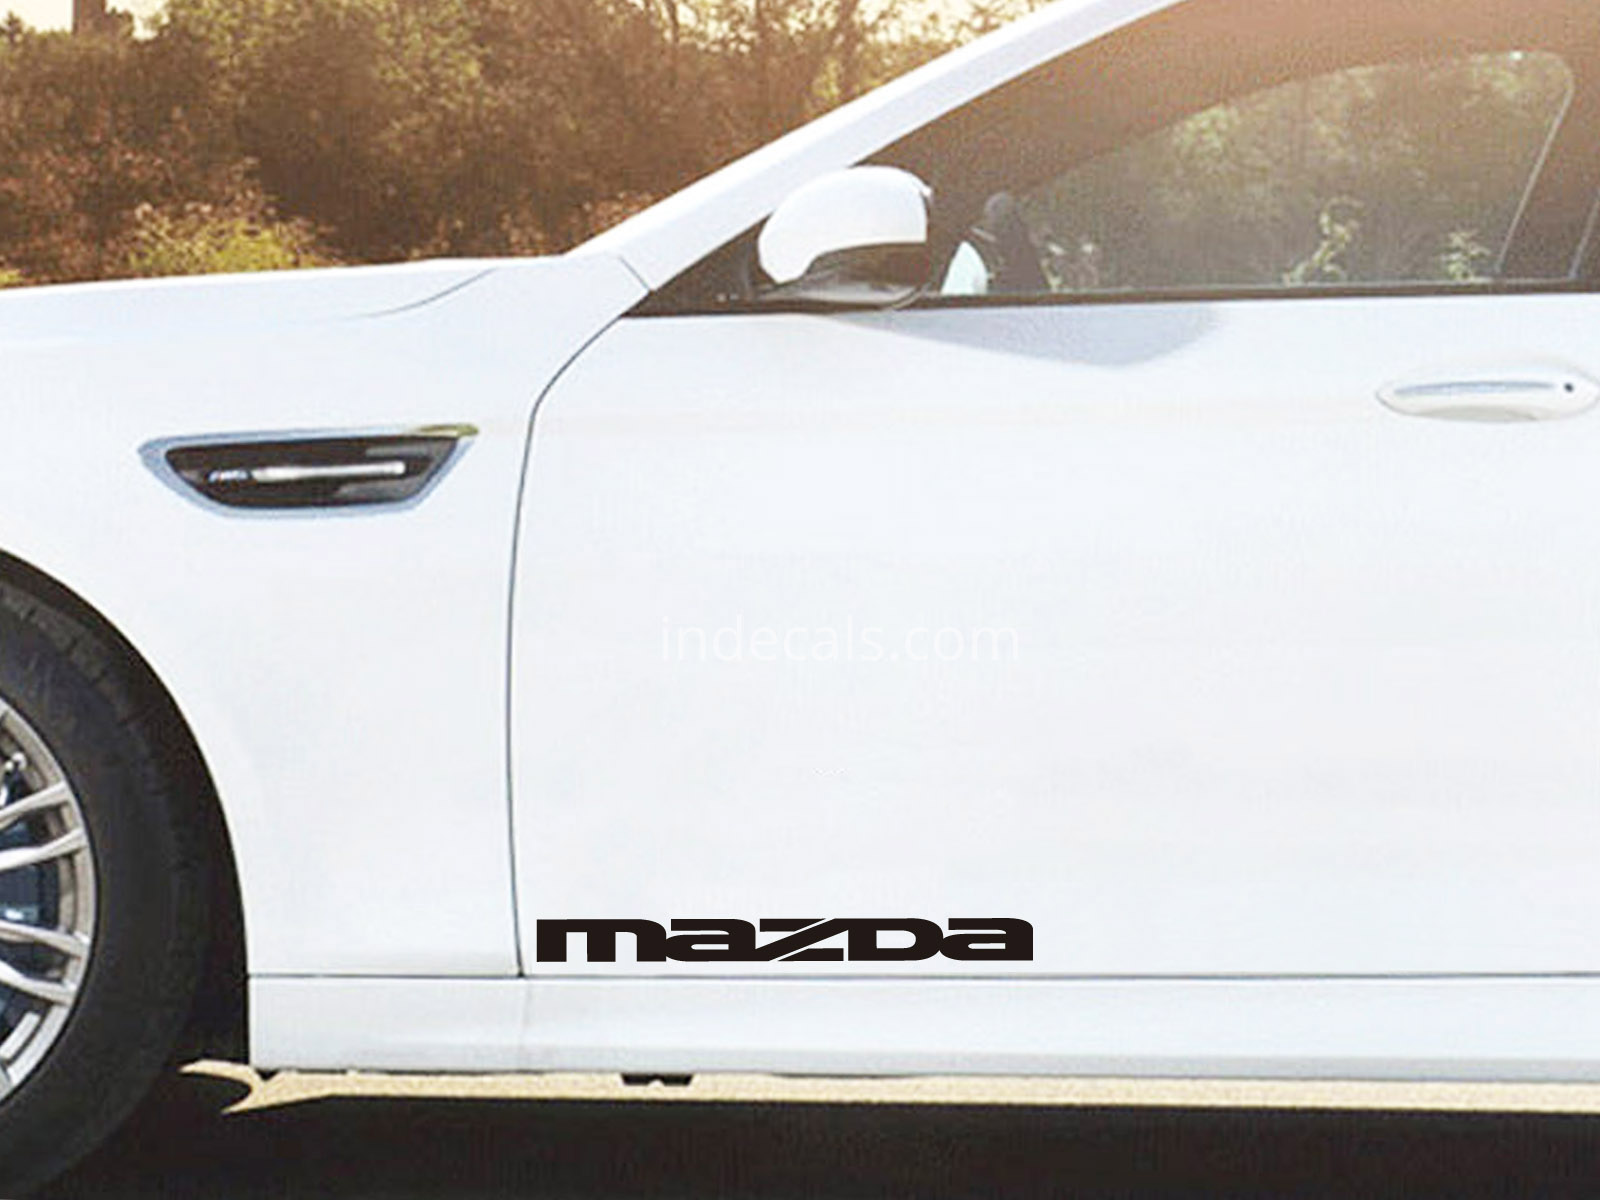 2 x Mazda Stickers for Doors Large - Black